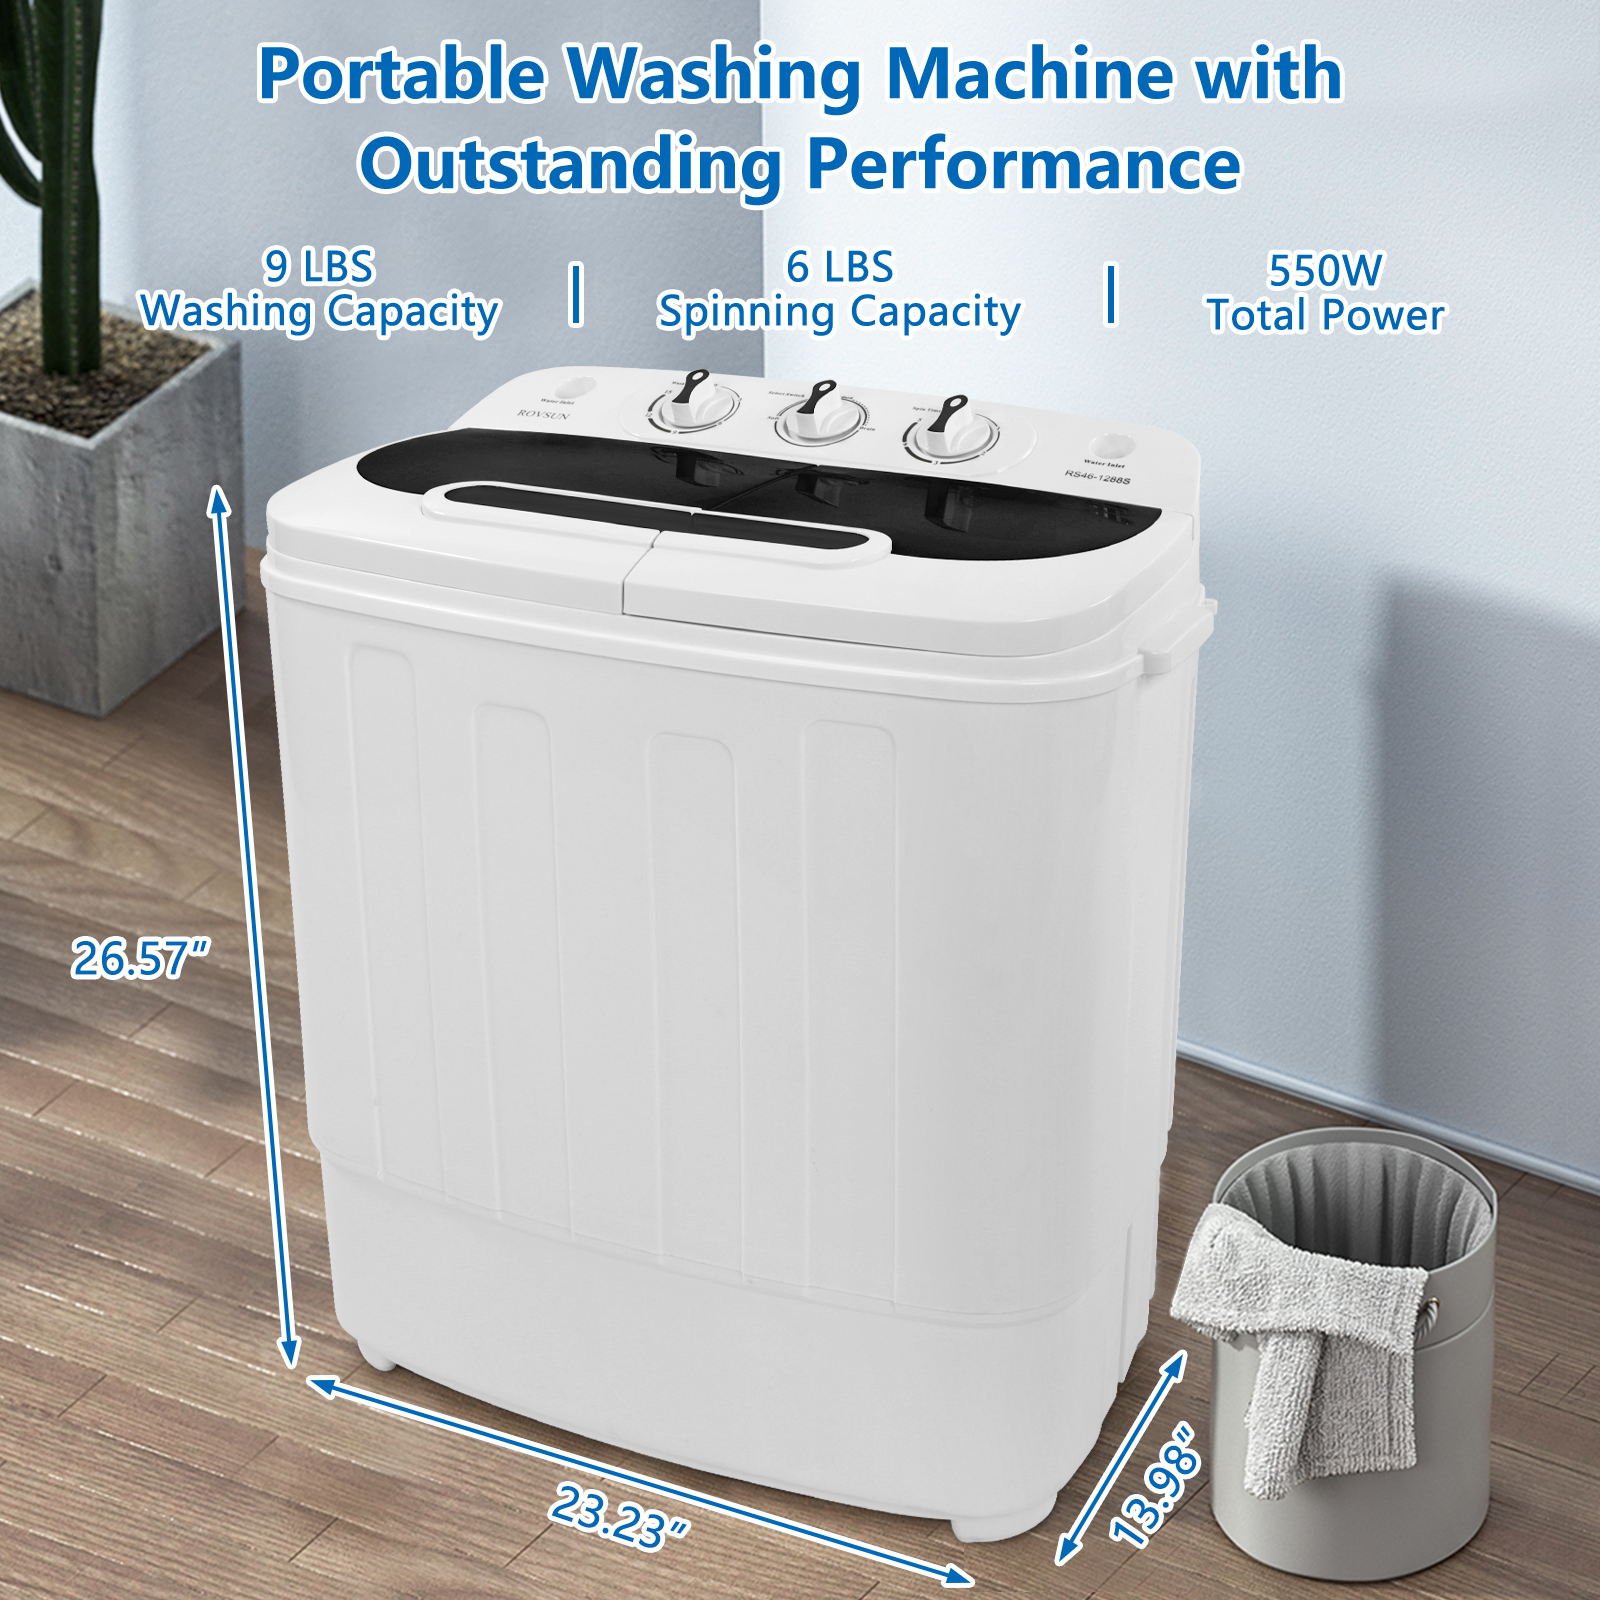 ROVSUN 15LBS Portable Washing Machine, Electric Washer and Dryer